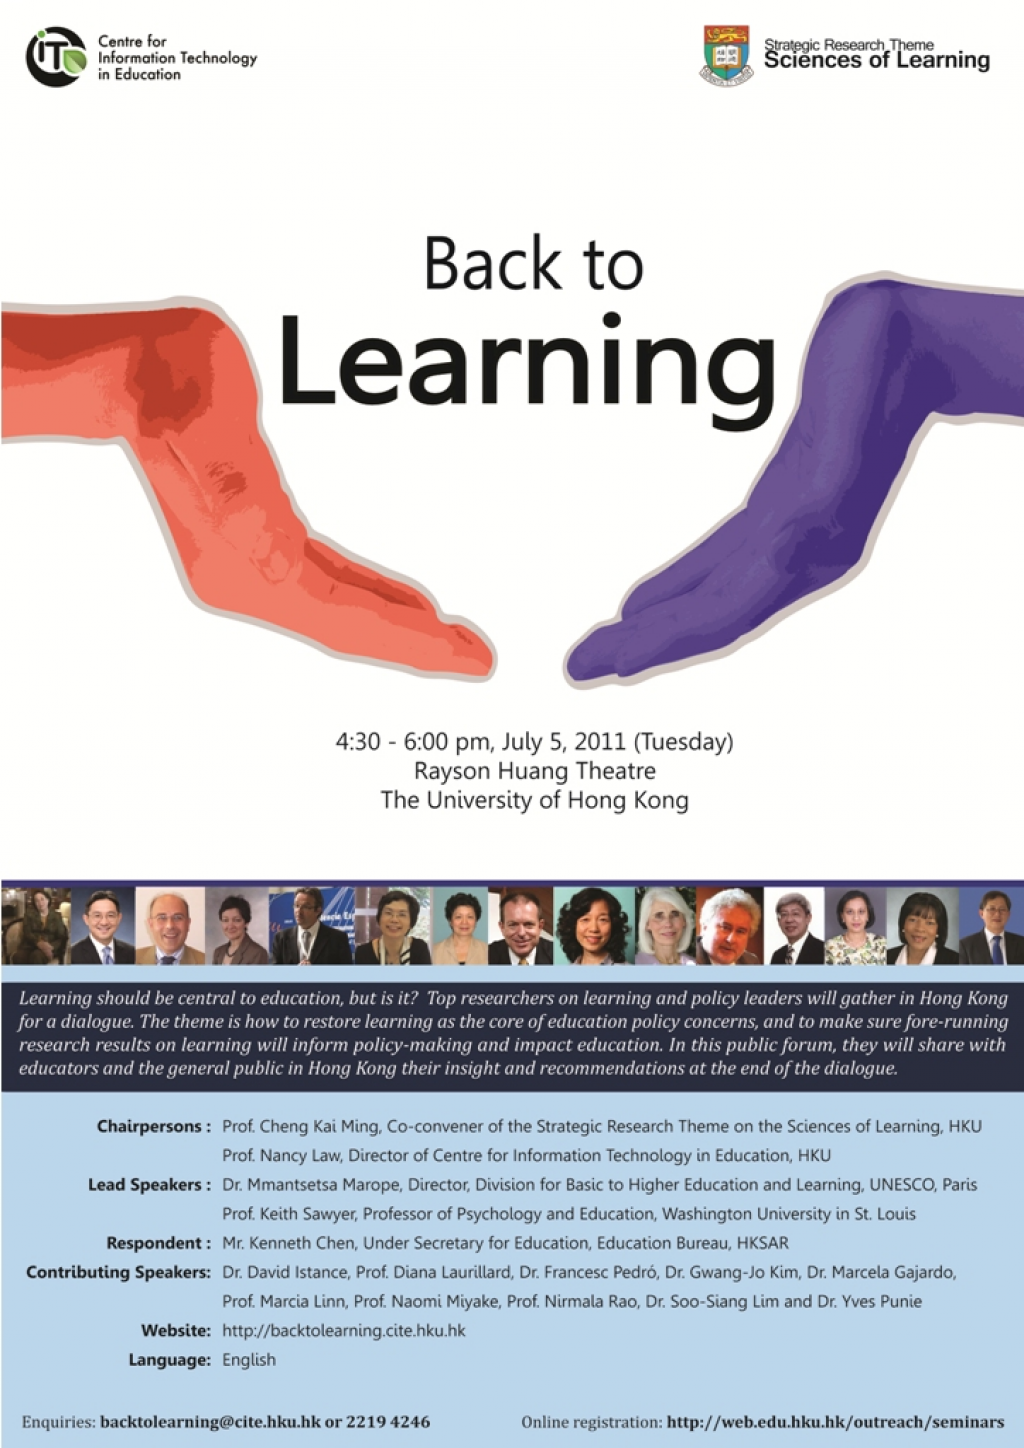 Public Forum - Back to Learning  